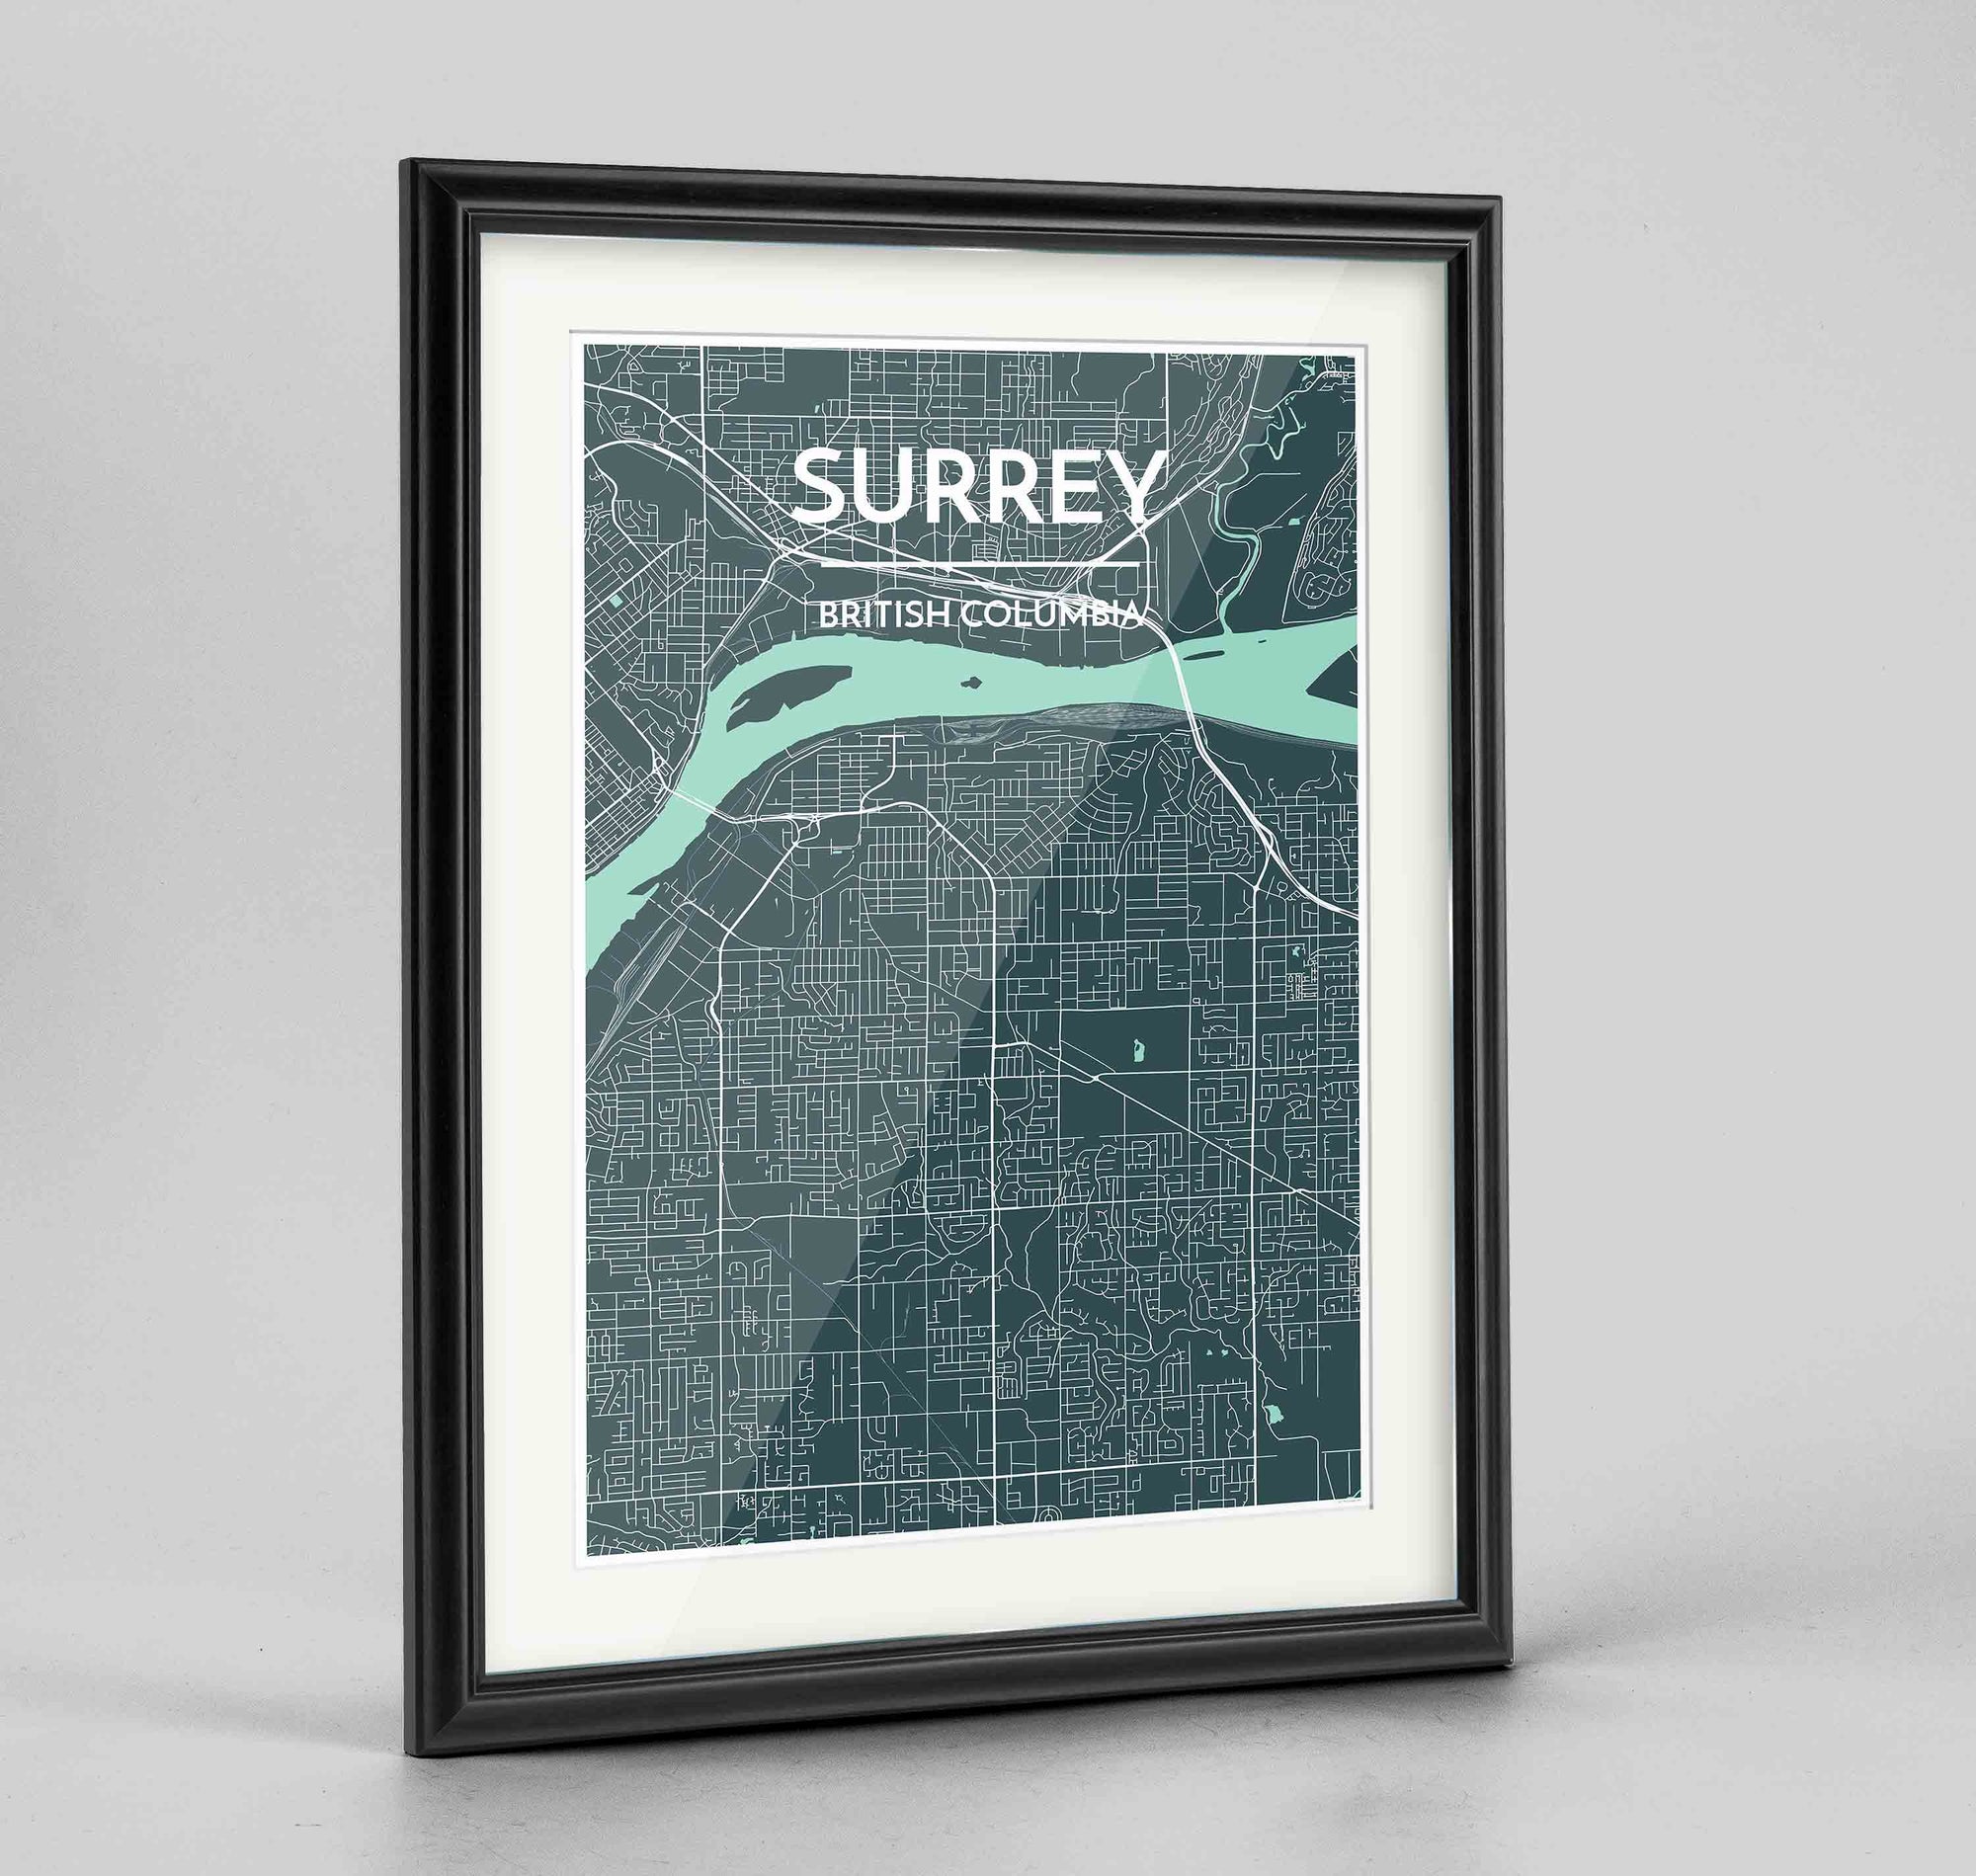 Framed Surrey City Map 24x36" Traditional Black frame Point Two Design Group